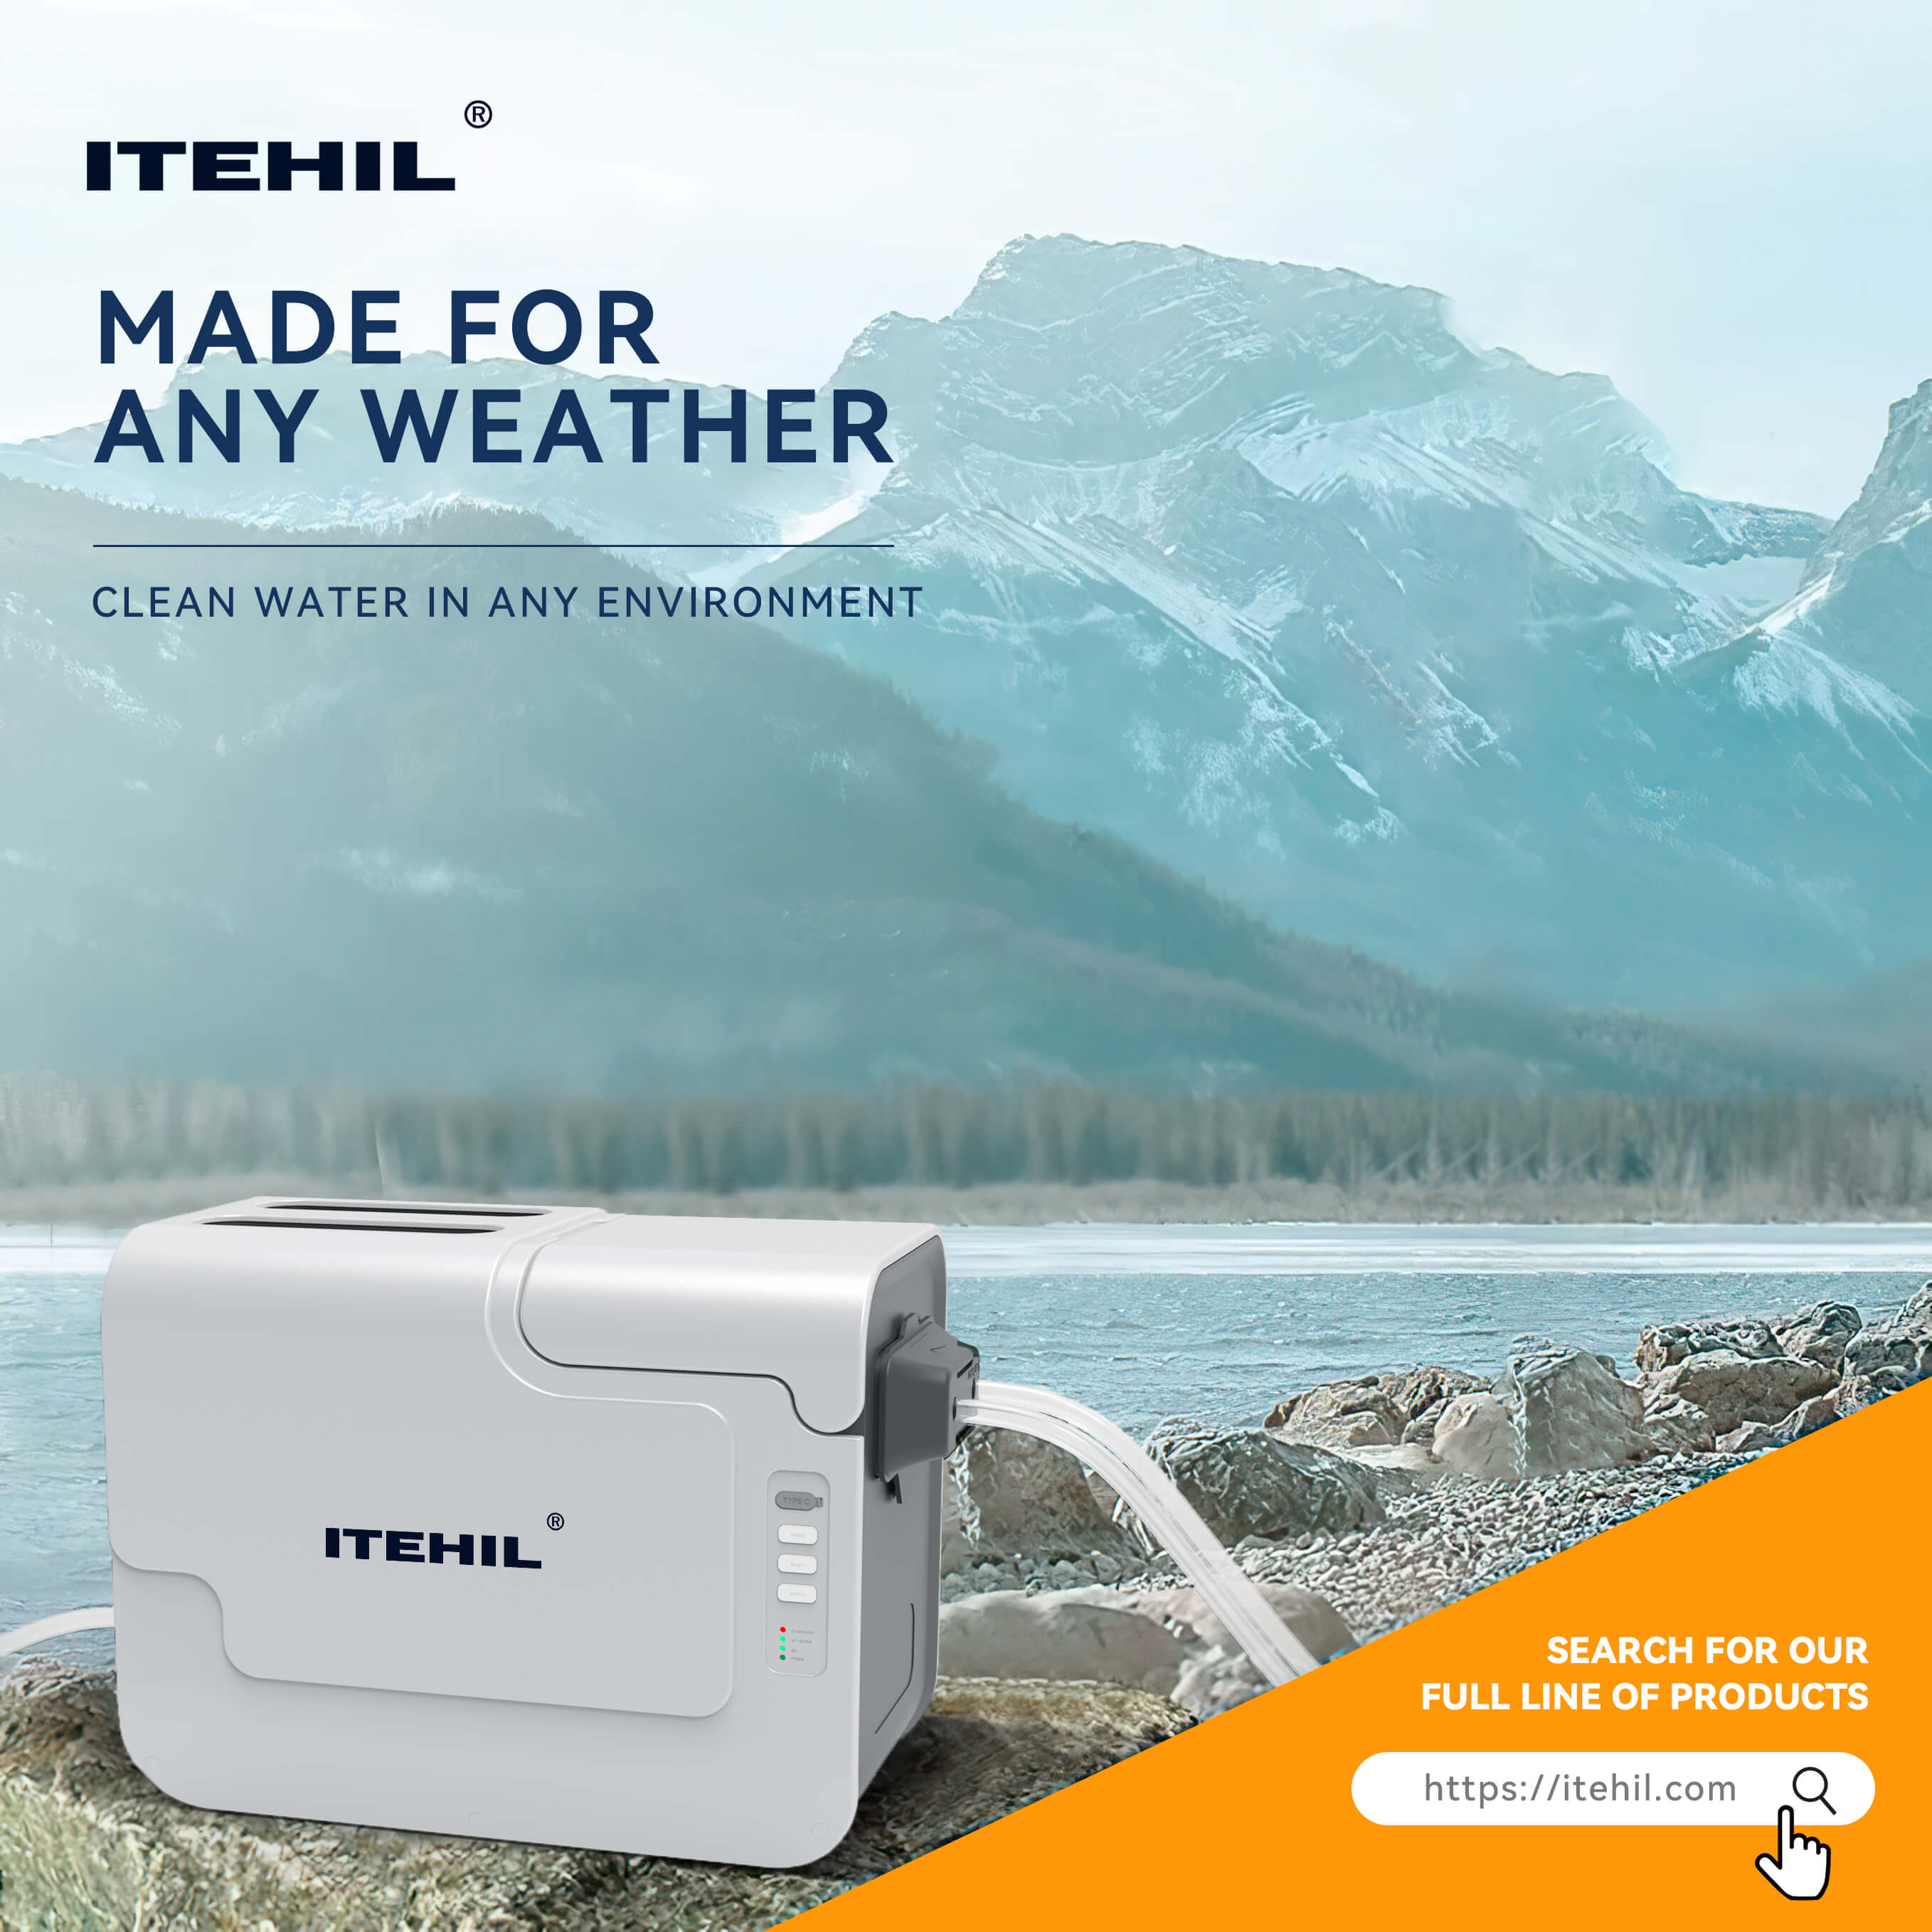 ITEHIL Camping RO Water Purifier for Hiking Survival(7.13 Gal)